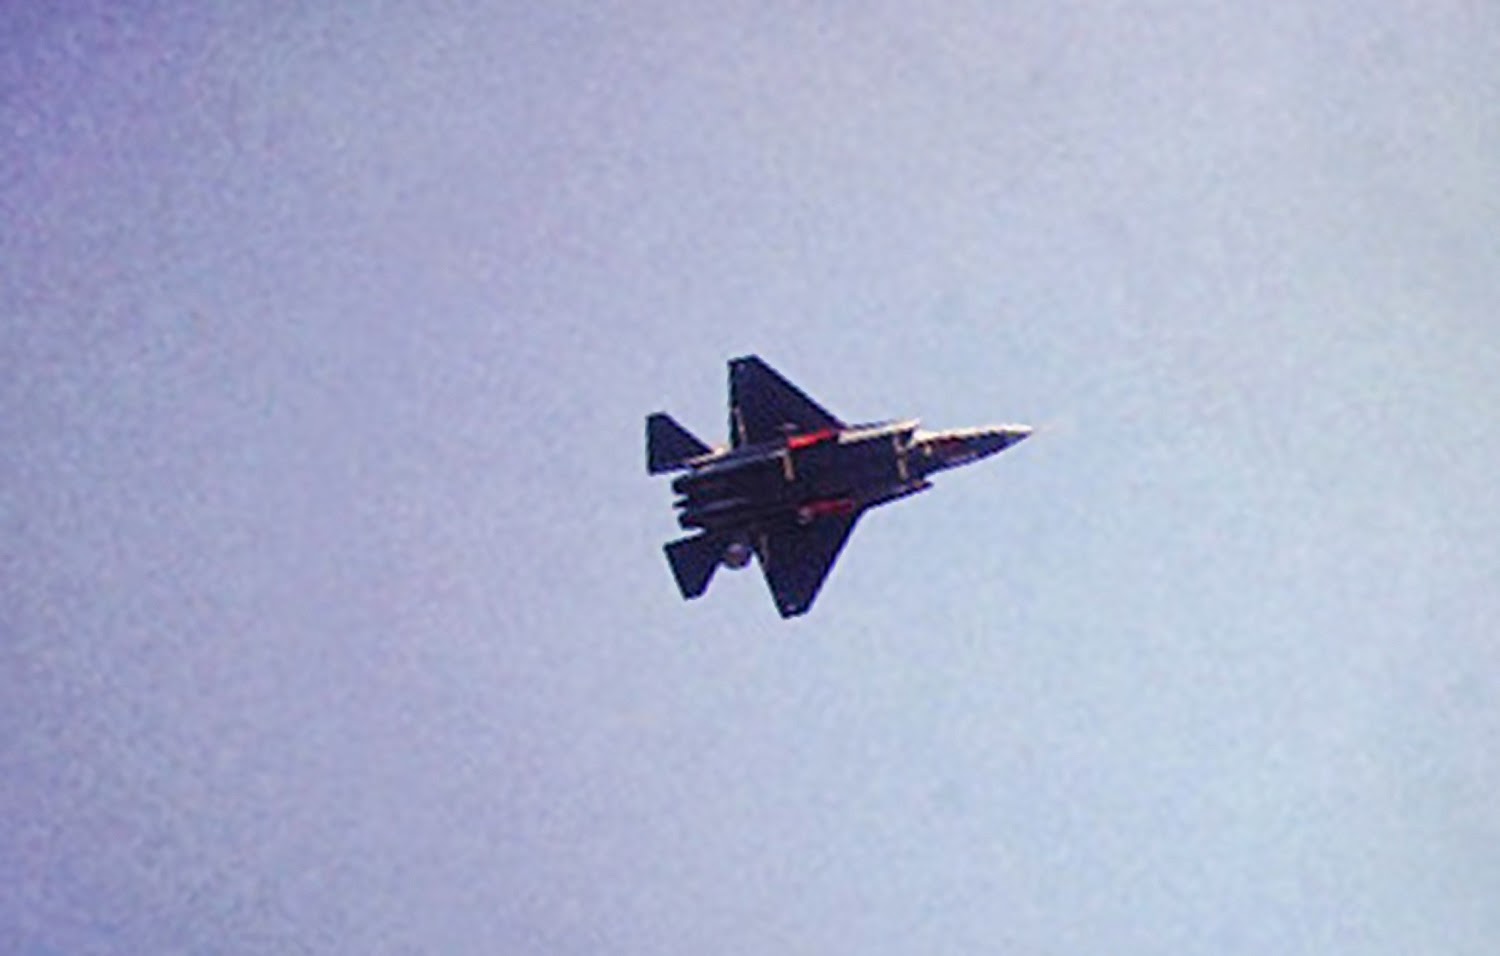 Shenyang J-31 - Página 4 J-31+test+flight+Chinese+F-60J31+Shen+Fei+(Falcon+Eagle)+fifth+Generation+Stealth+Fighter+Jet+from+its+flight+plaaf+pakistan+air+force+paf+(9)